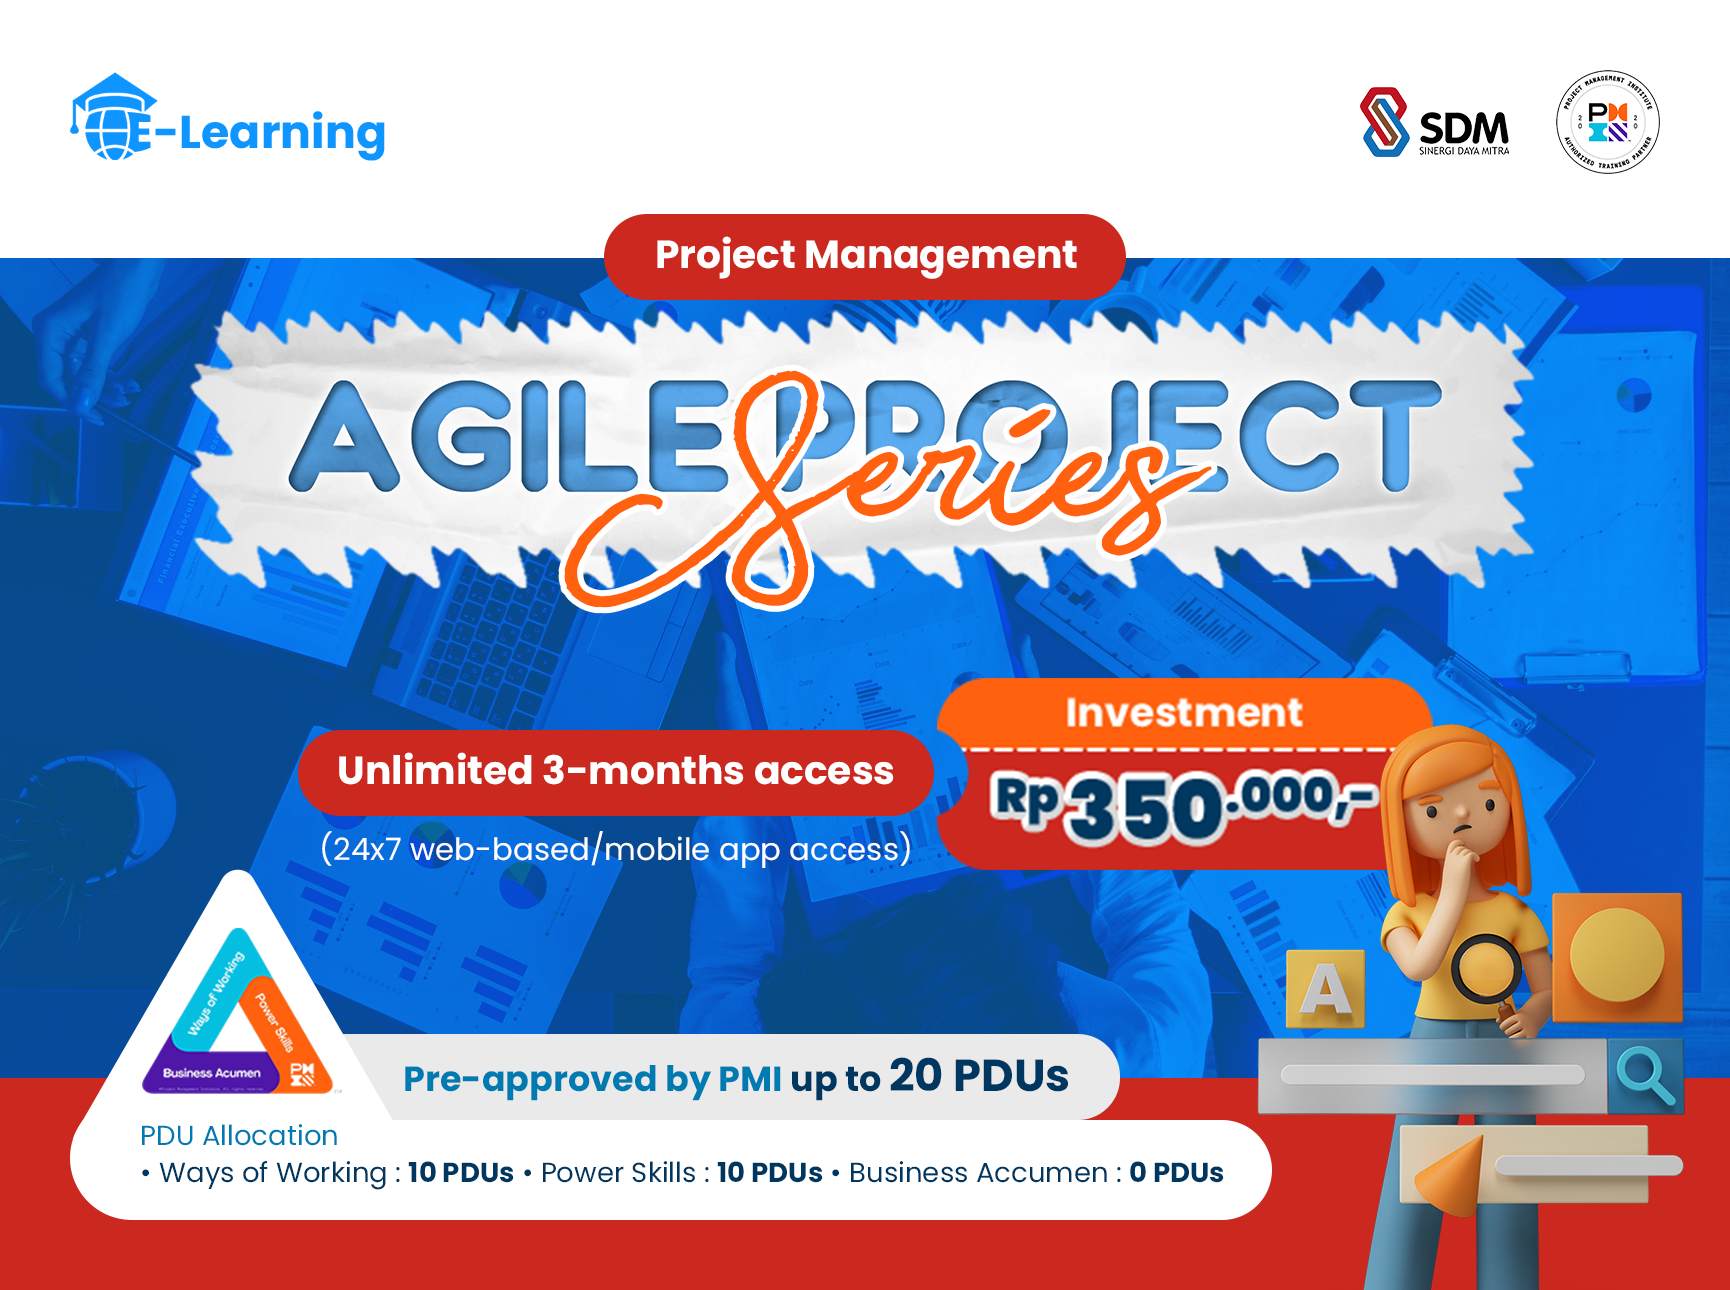 E-Learning Project Management - Agile Project Series